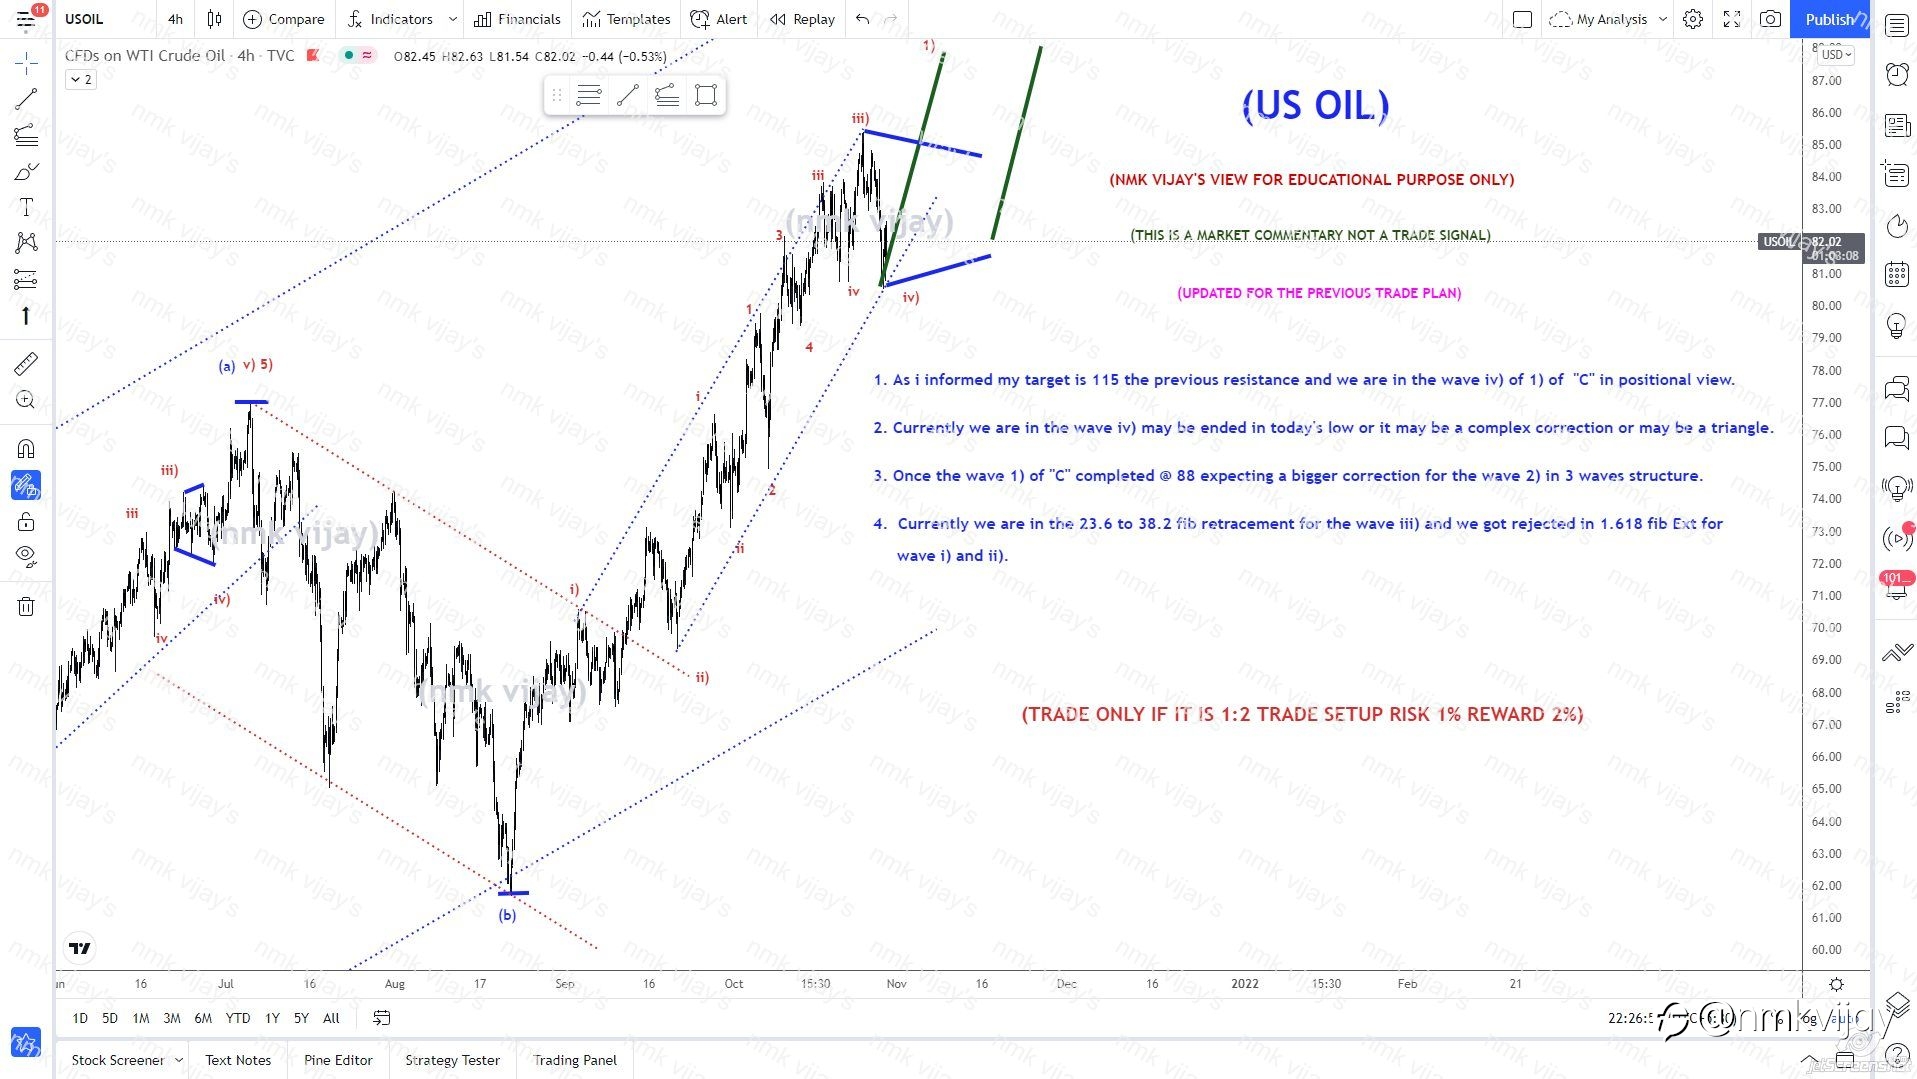 USOIL-We are in wave iv) completed or in complex? Wave v) to 88?